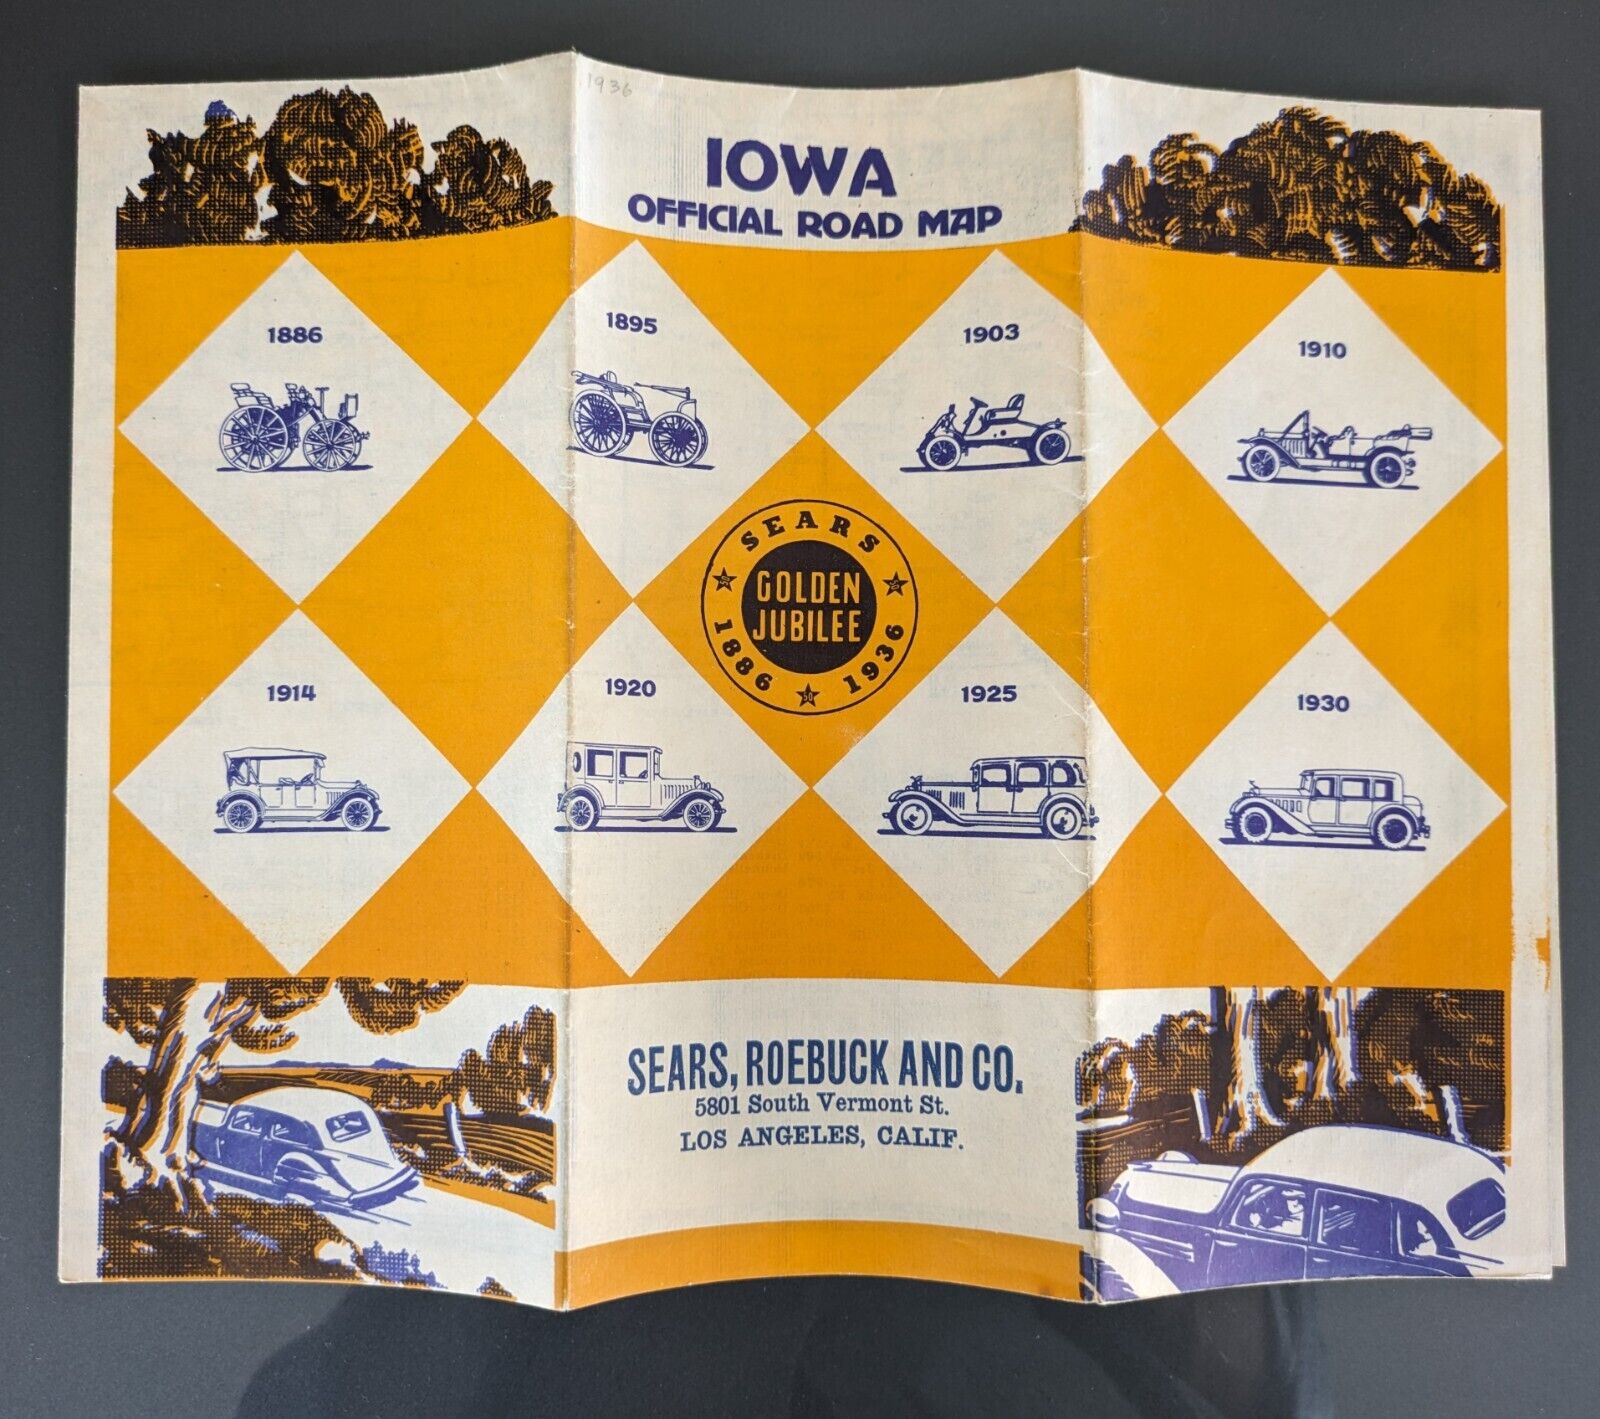 Sears Road Map of Iowa 1936 -- Shipping Included